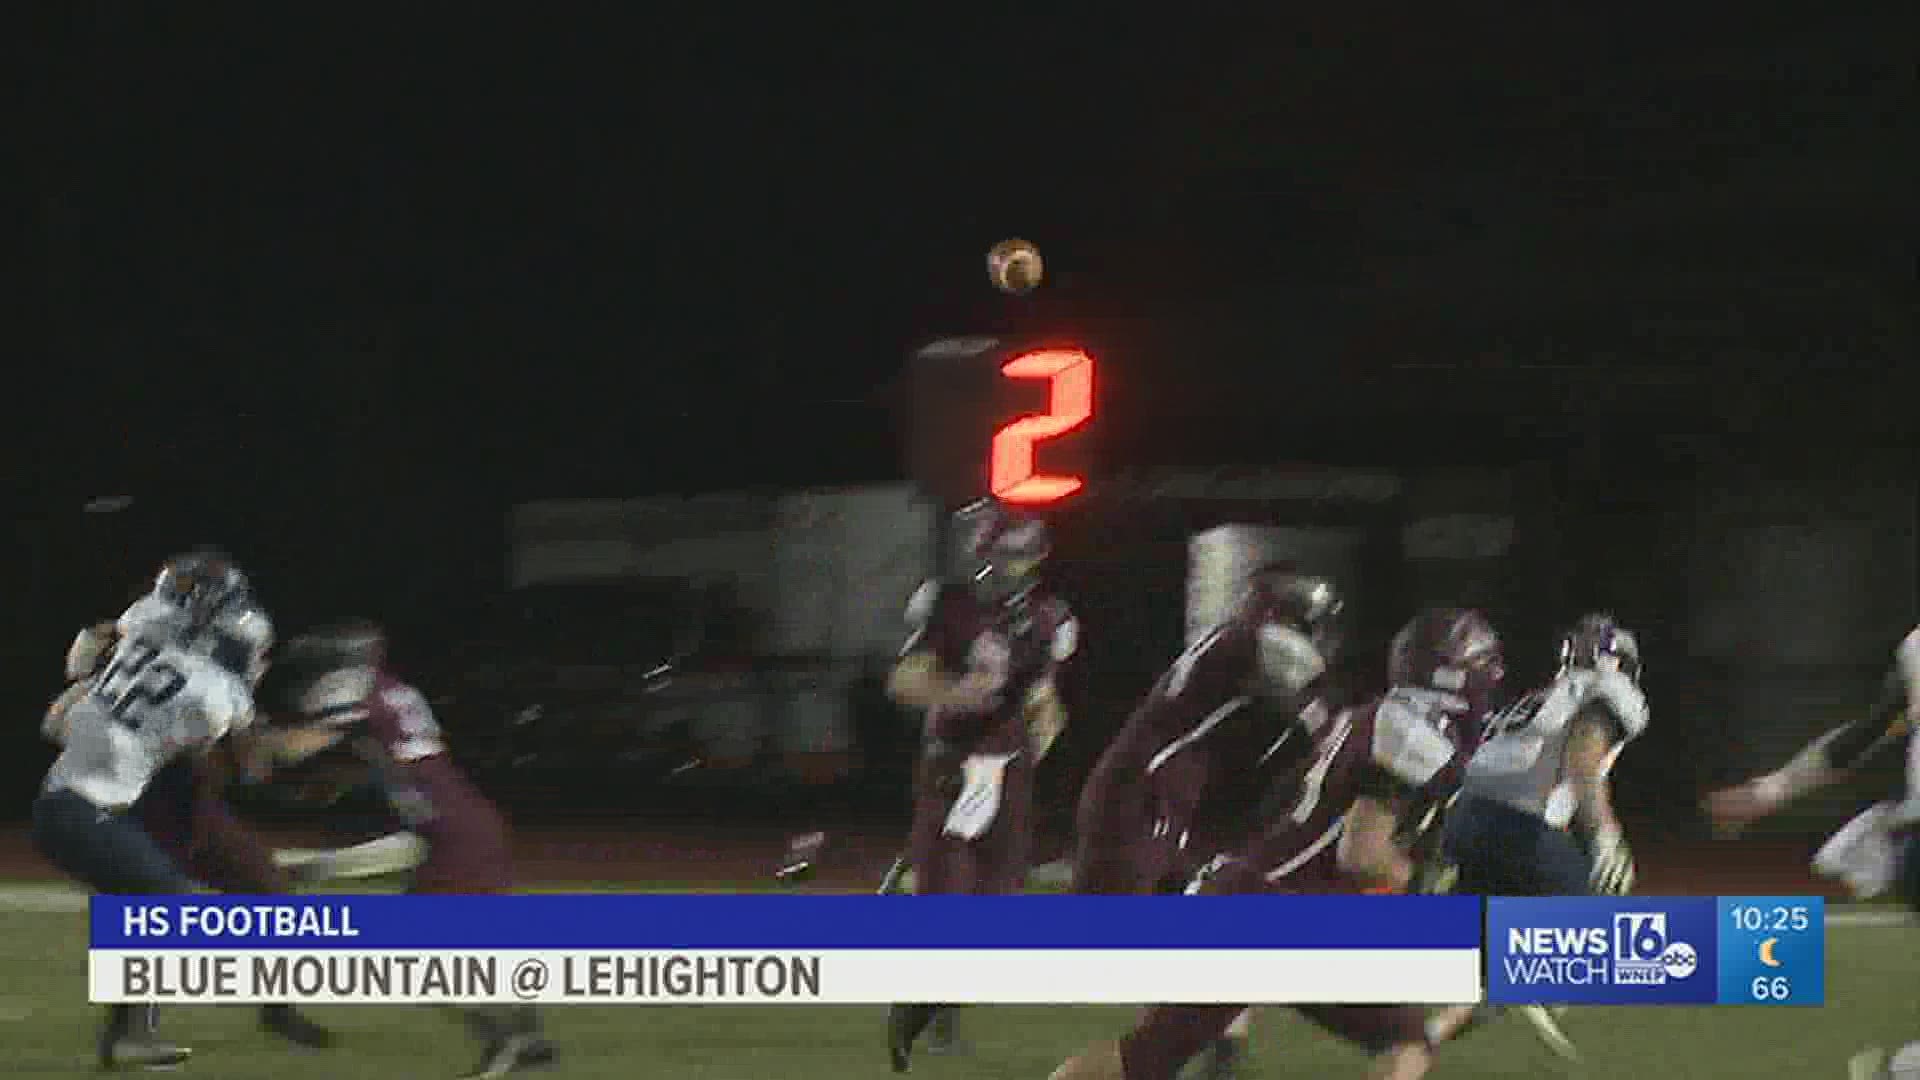 Blue Mountain improves to 3-3 with a 35-0 win over Lehighton in HS football